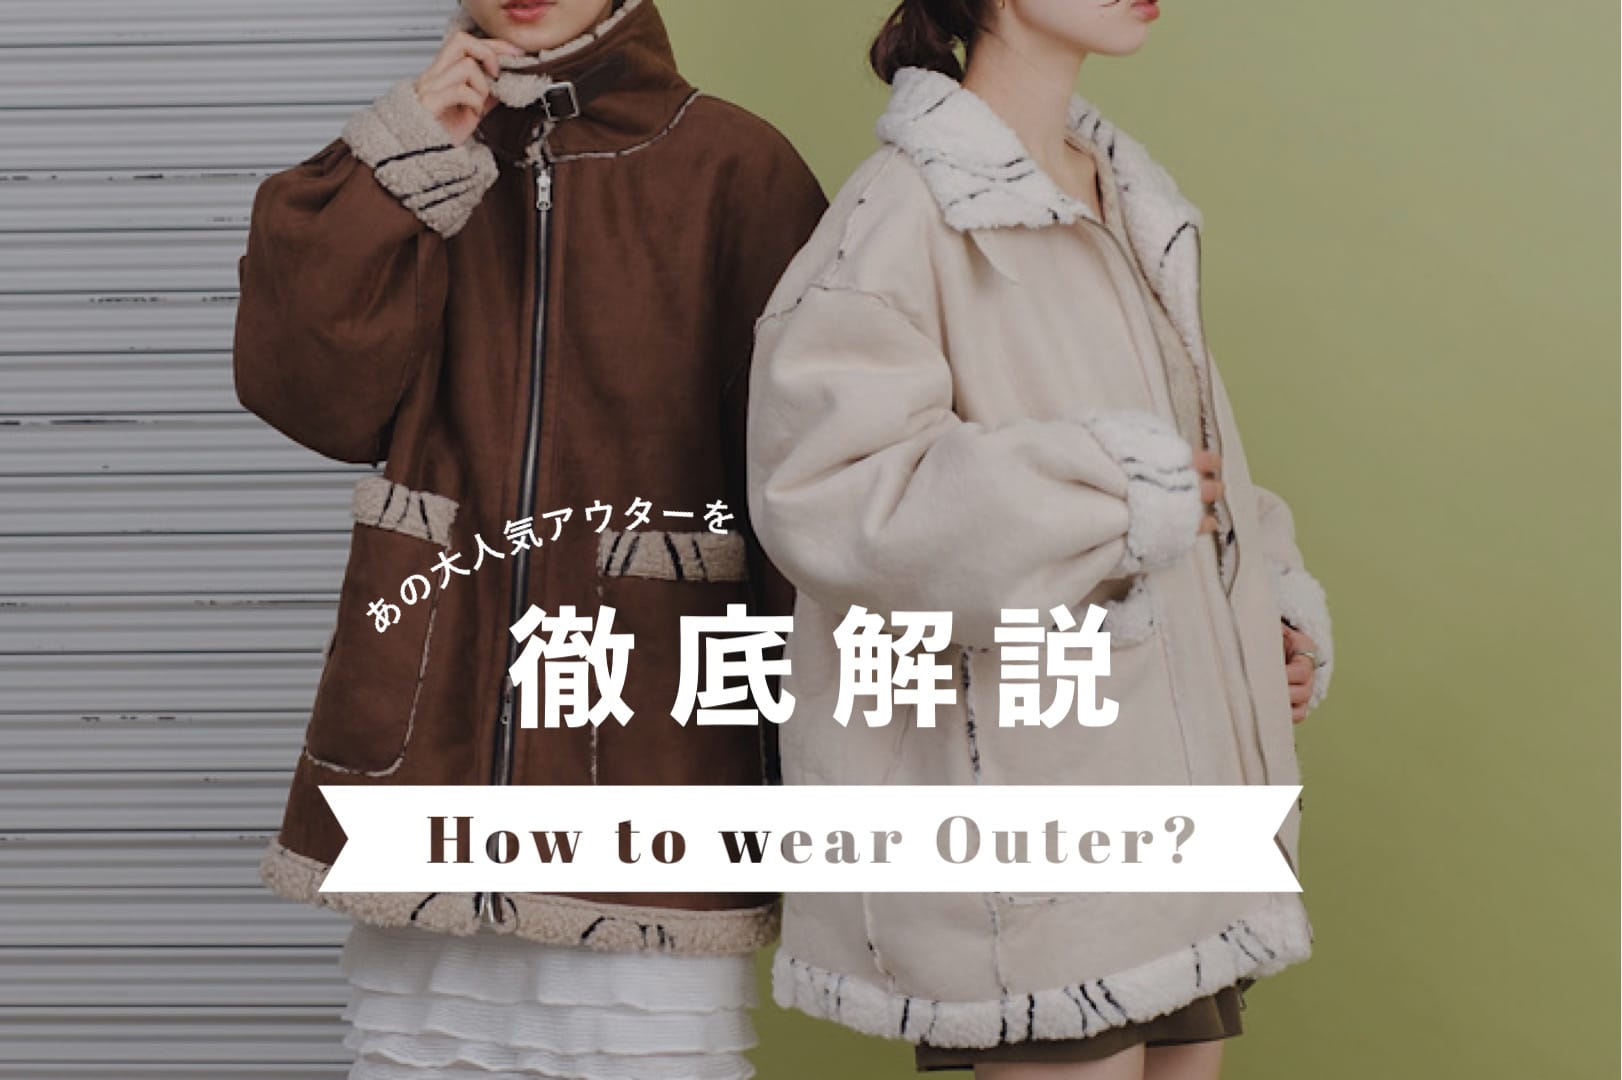 Kastane 大人気アウターを徹底解説！How to wear Outer?